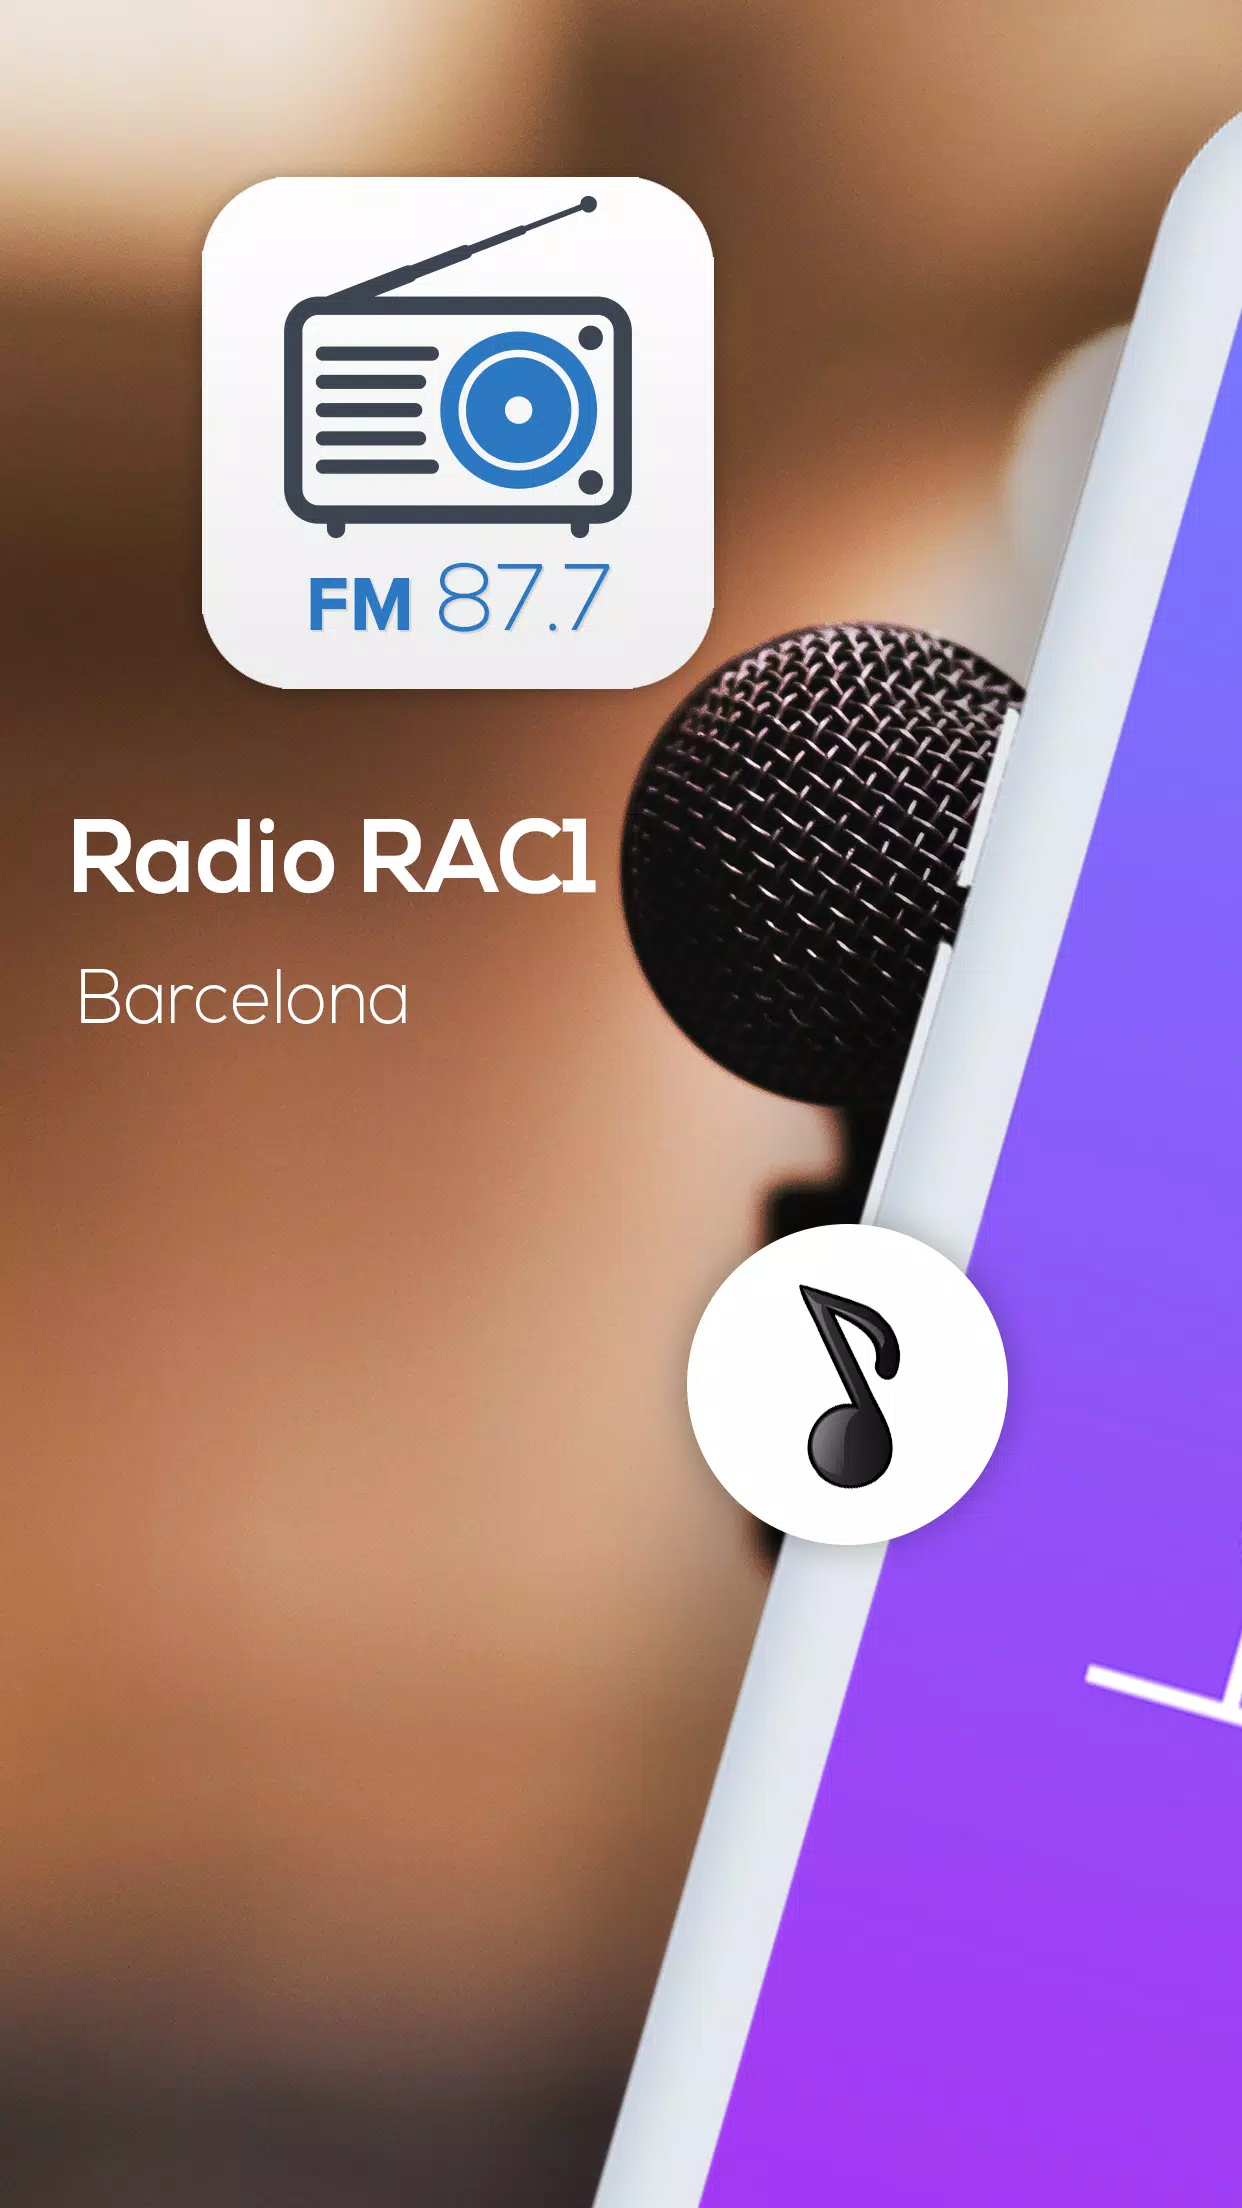 Radio RAC1 87.7 FM Barcelona for Android - APK Download